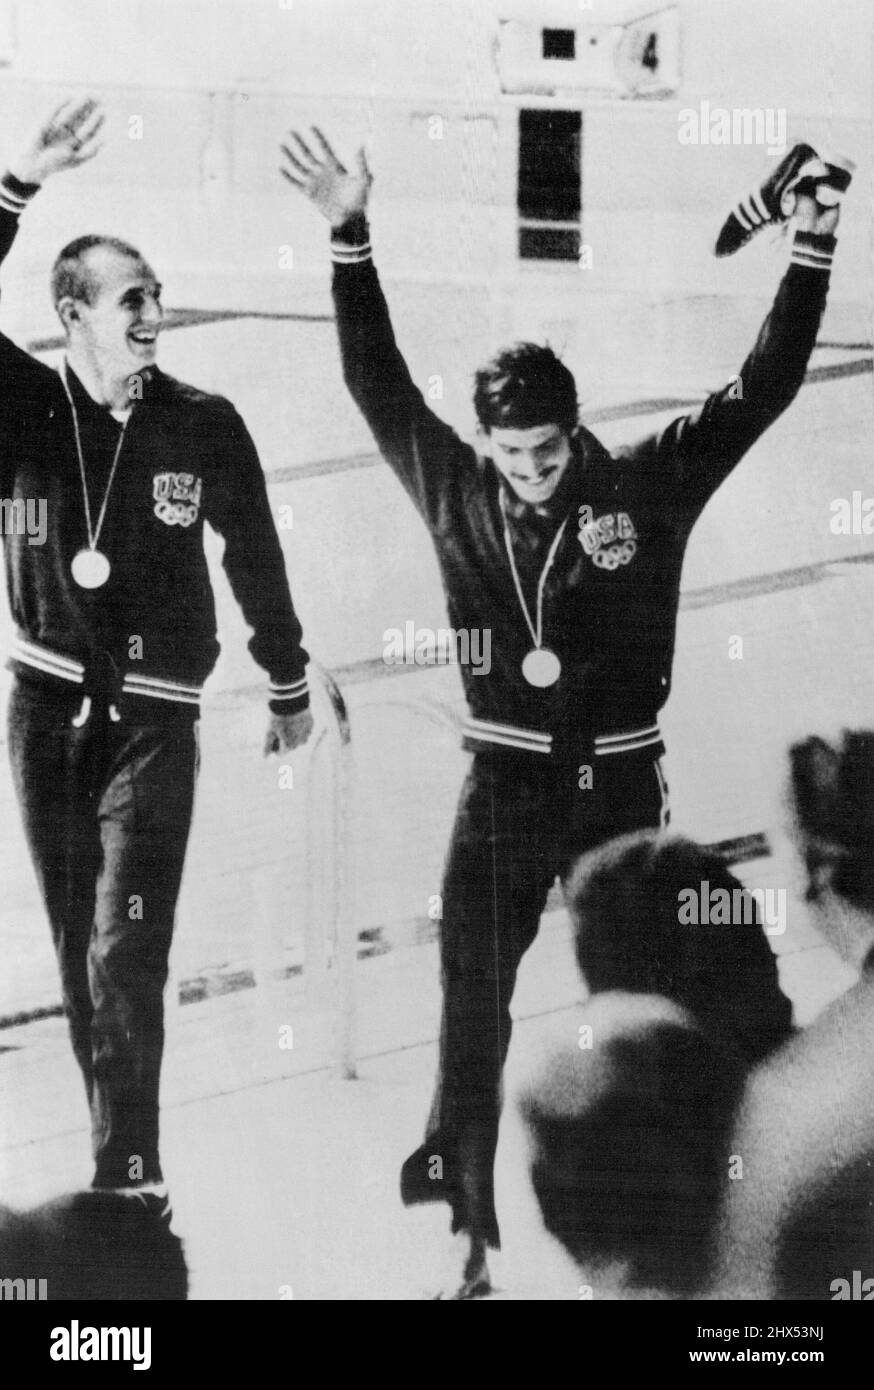 Carrying his shoes, record breaking gold medal swimmer Mark Spitz joins U.S.A. teammate Steven Genter(L) in waving to crowd after accepting medals that hang around their necks. presentation followed 200 meters freestyle in which Spitz set new world record of 1:57.78 Genter took second; W. German Werner Lampe was third, beating Australia's Wenden, who was fourth. April 8, 1929. (Photo by UPI) Stock Photo